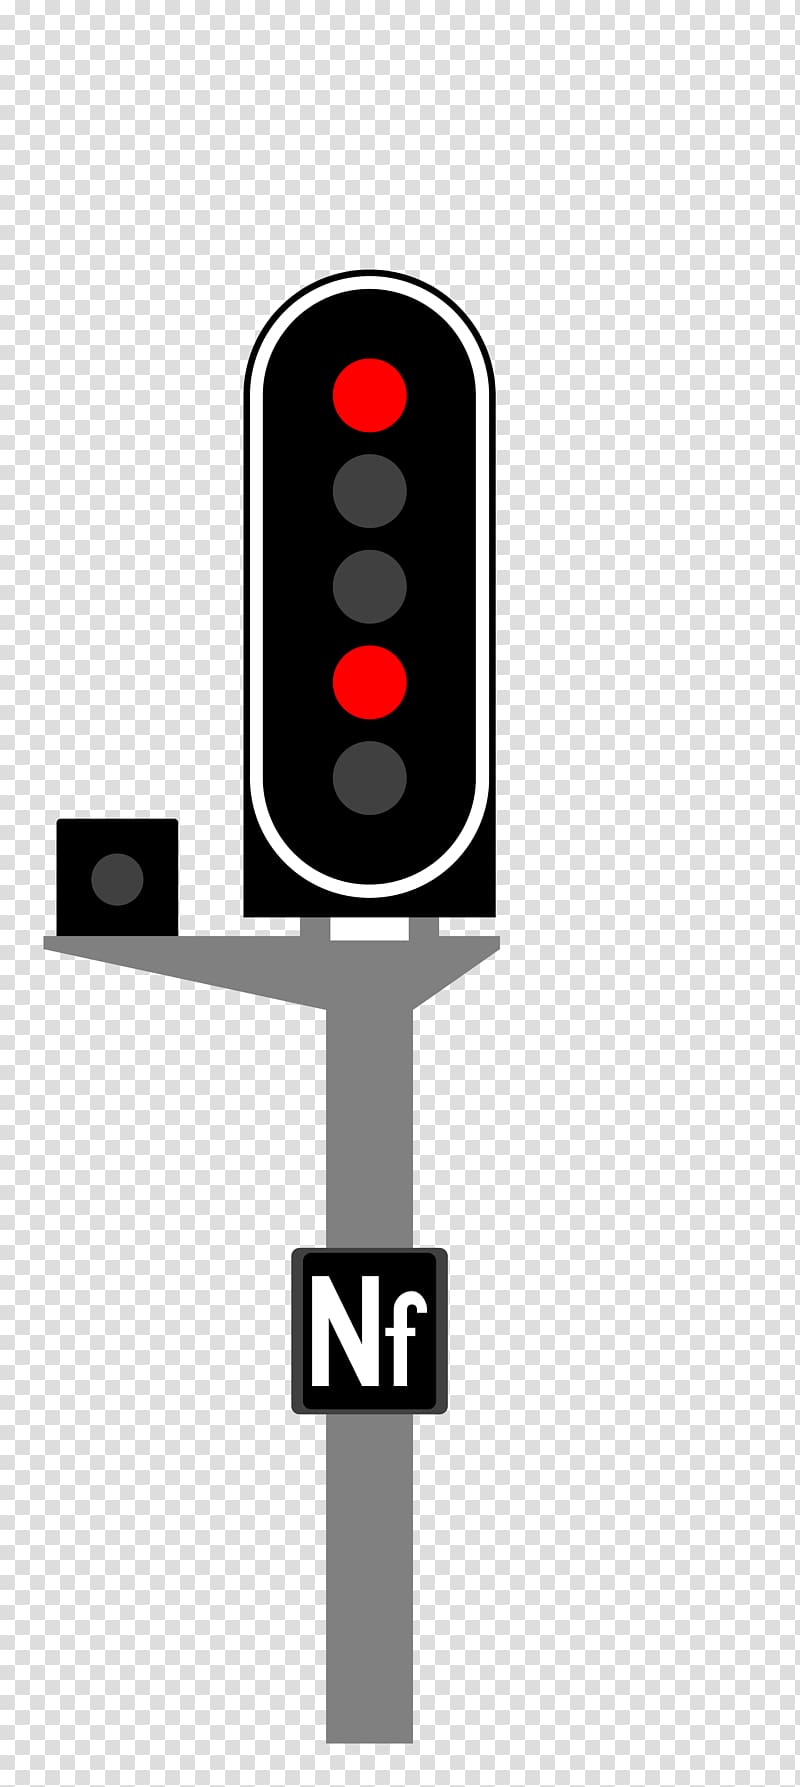 Train French railway signalling Carré Railway semaphore signal, train transparent background PNG clipart